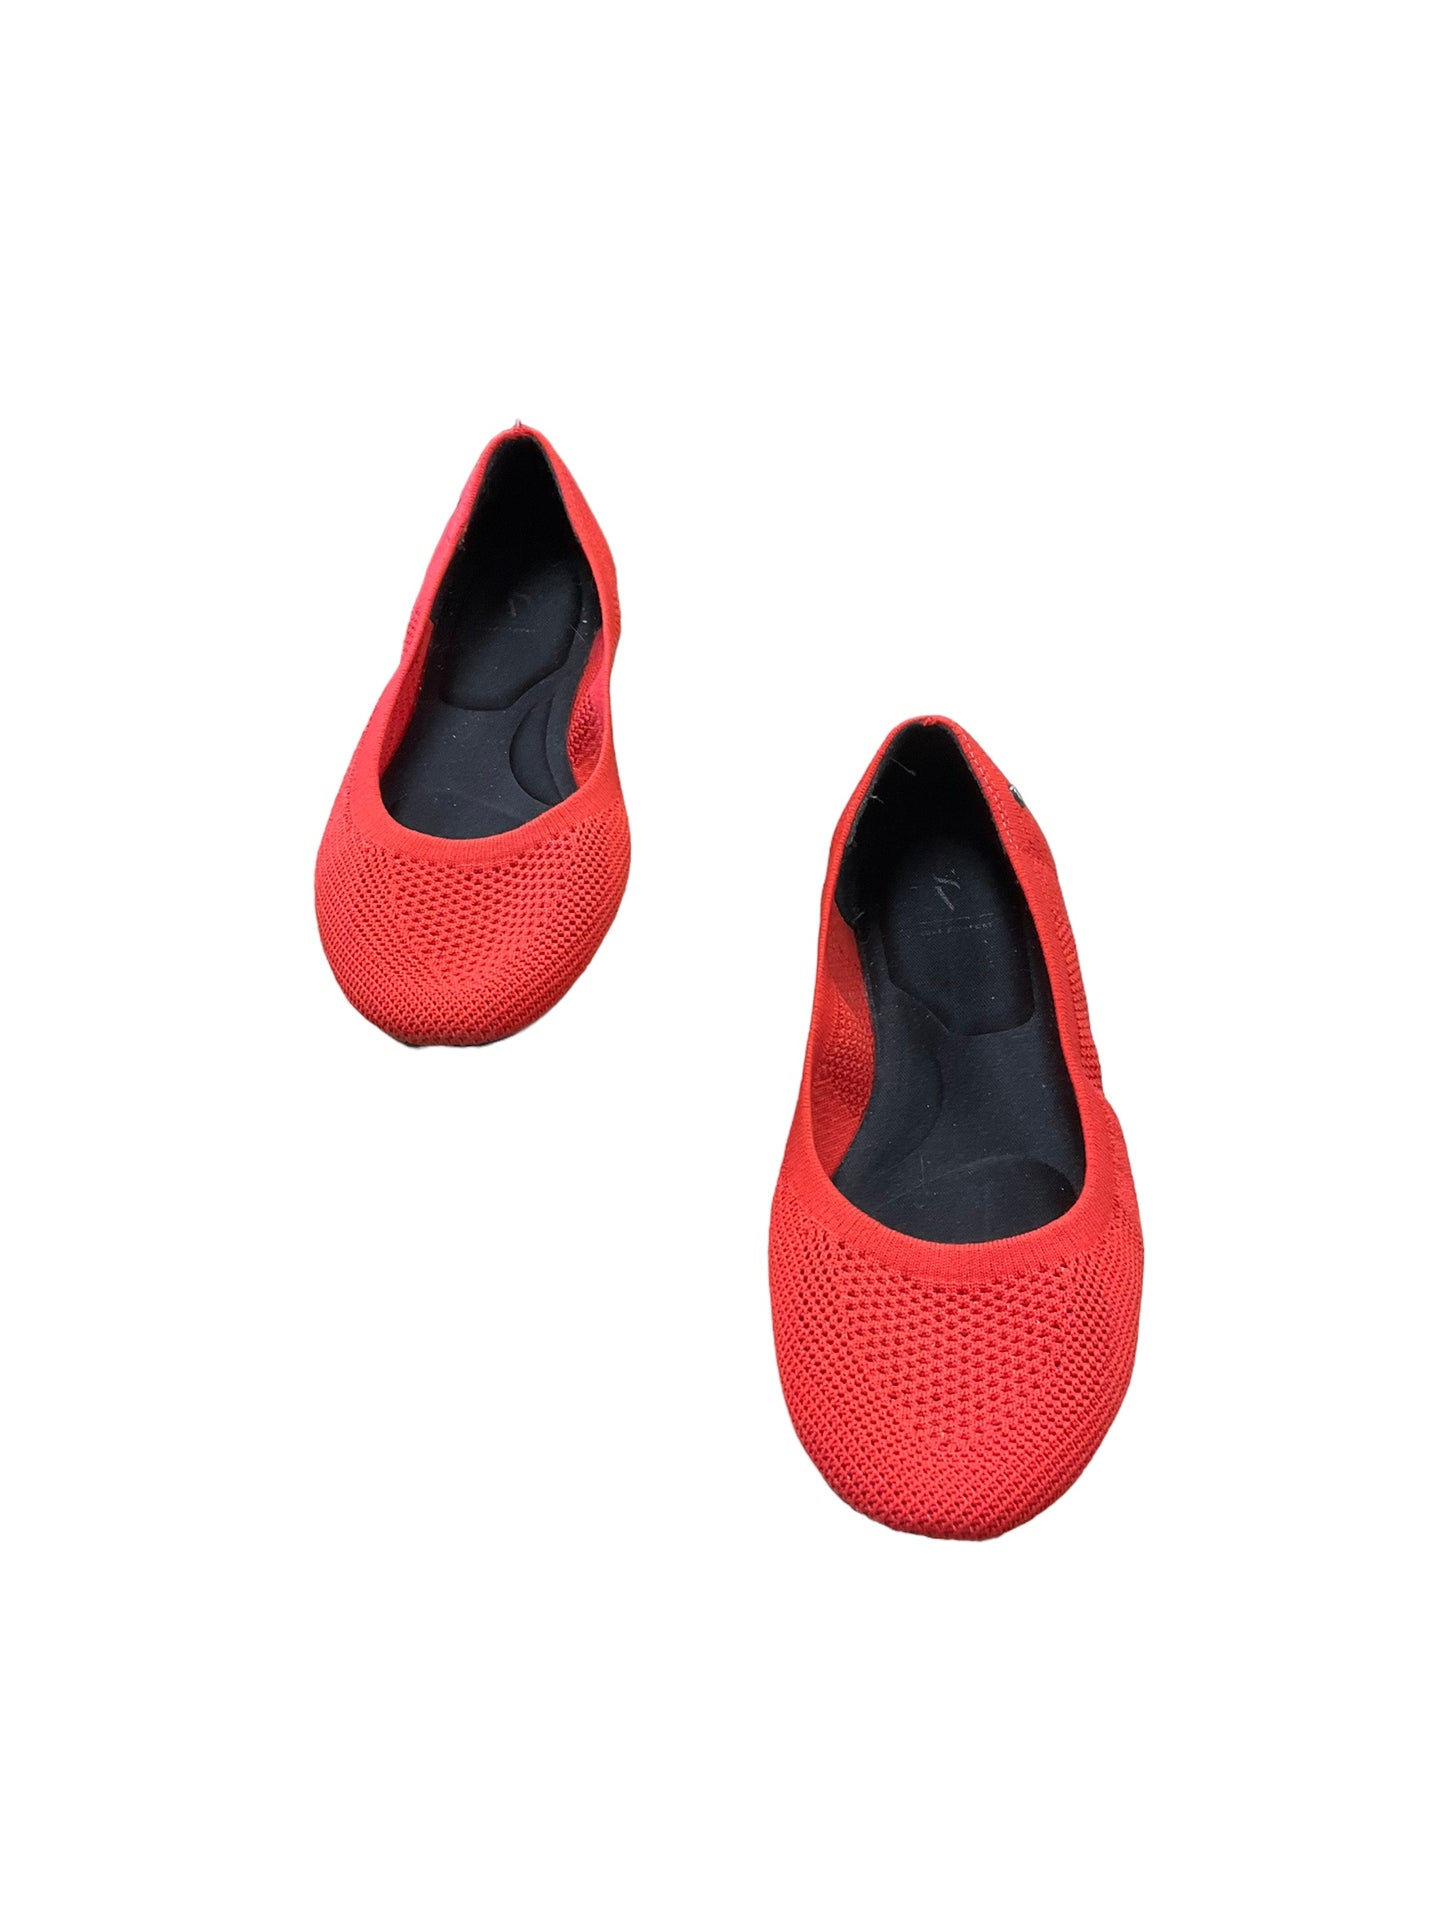 Shoes Flats Ballet By Simply Vera  Size: 8.5